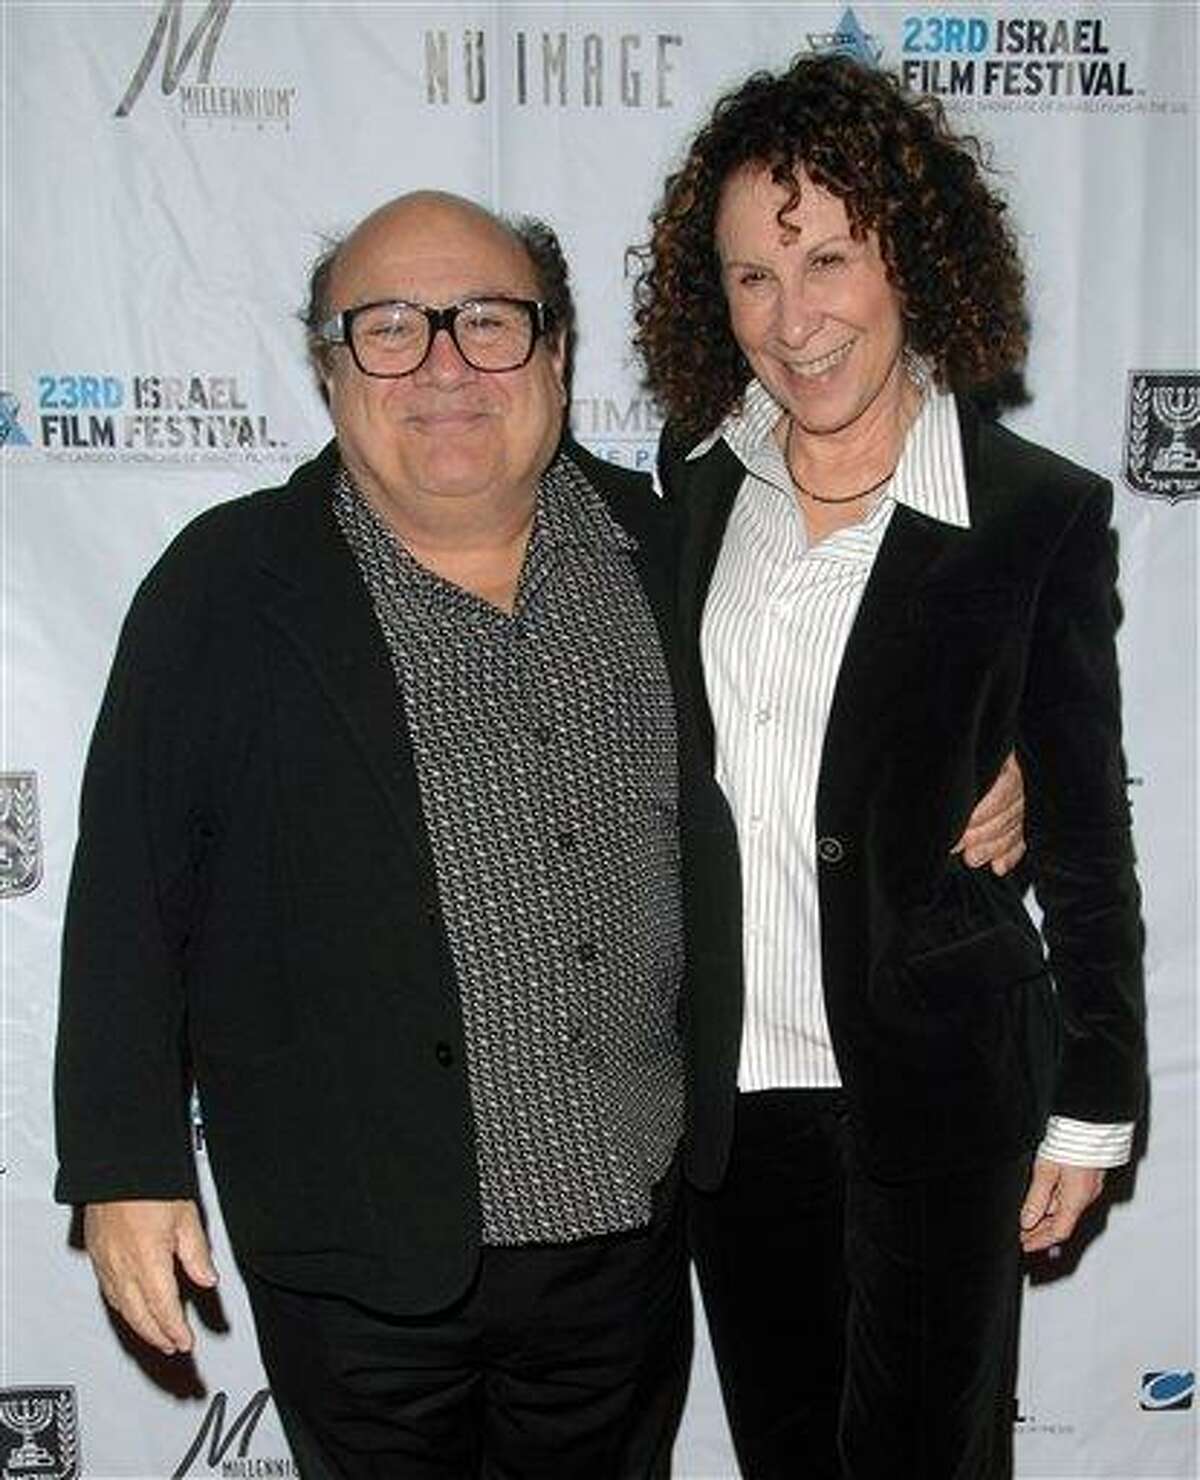 Actors Danny Devito, left, and Rhea Perlman attend the opening night of the 23rd Annual Israel Film Festival at the Ziegfeld Theatre in New York in 2008. A spokesman for DeVito says the couple is separating after 30 years of marriage. Publicist Stan Rosenfield offered no other details. Associated Press